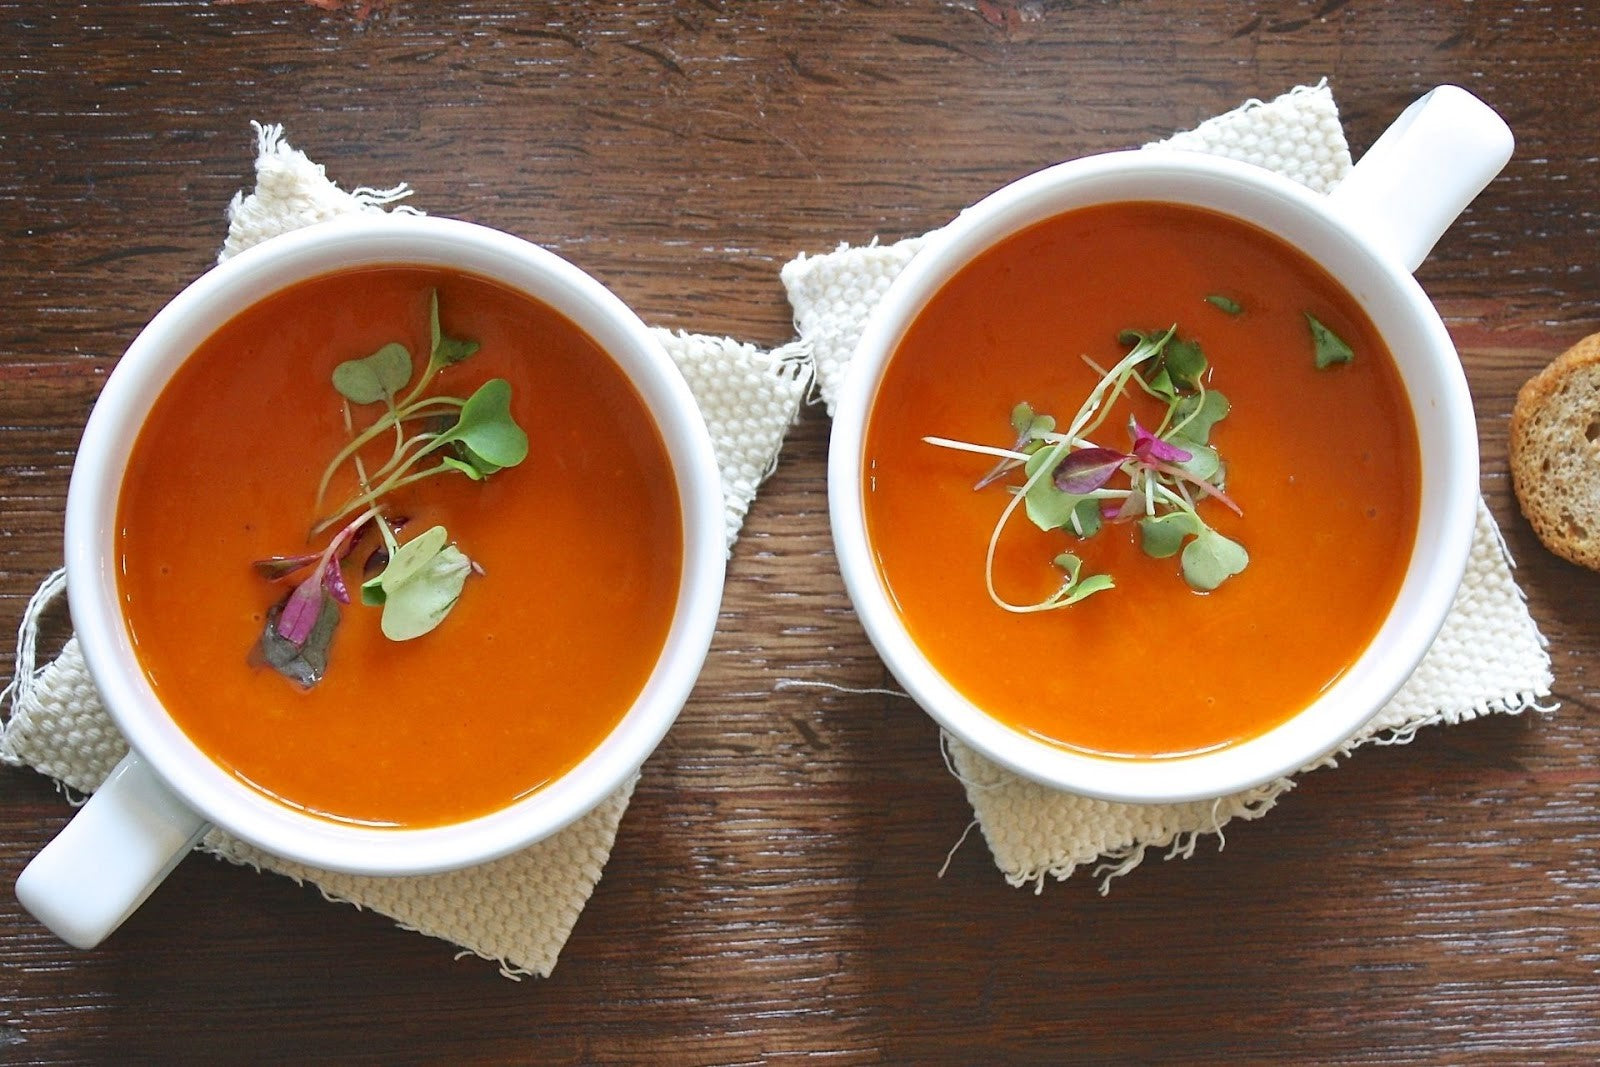 Soup prepared for two people